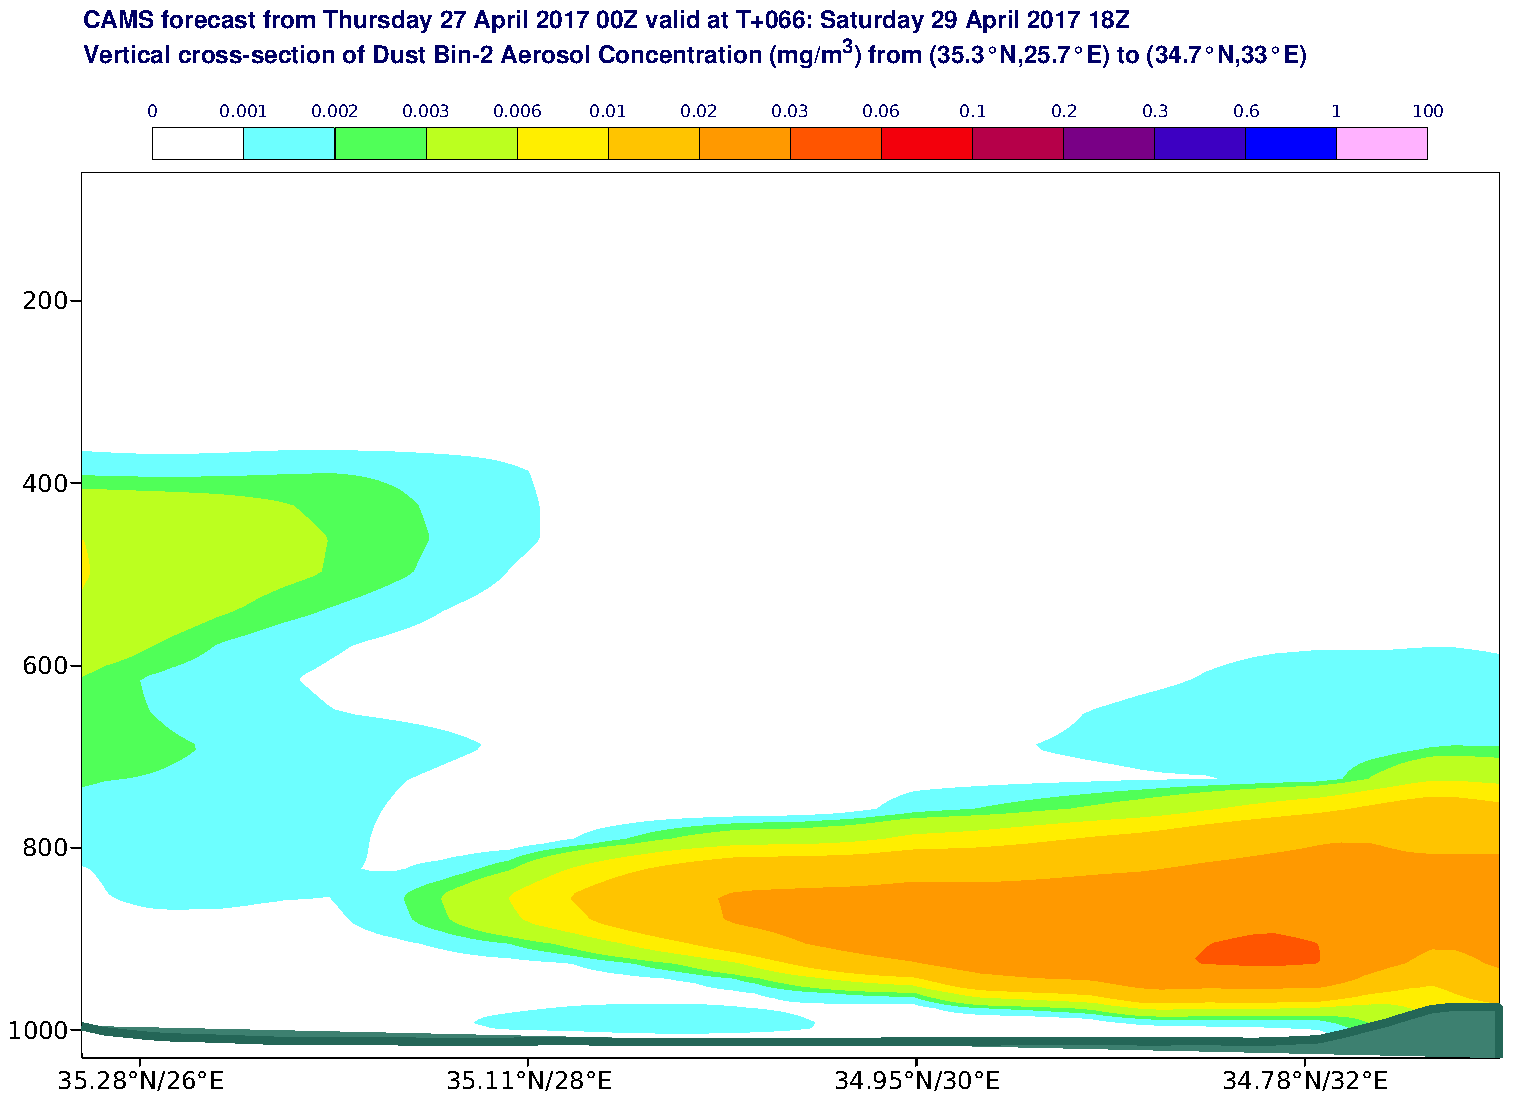 Vertical cross-section of Dust Bin-2 Aerosol Concentration (mg/m3) valid at T66 - 2017-04-29 18:00